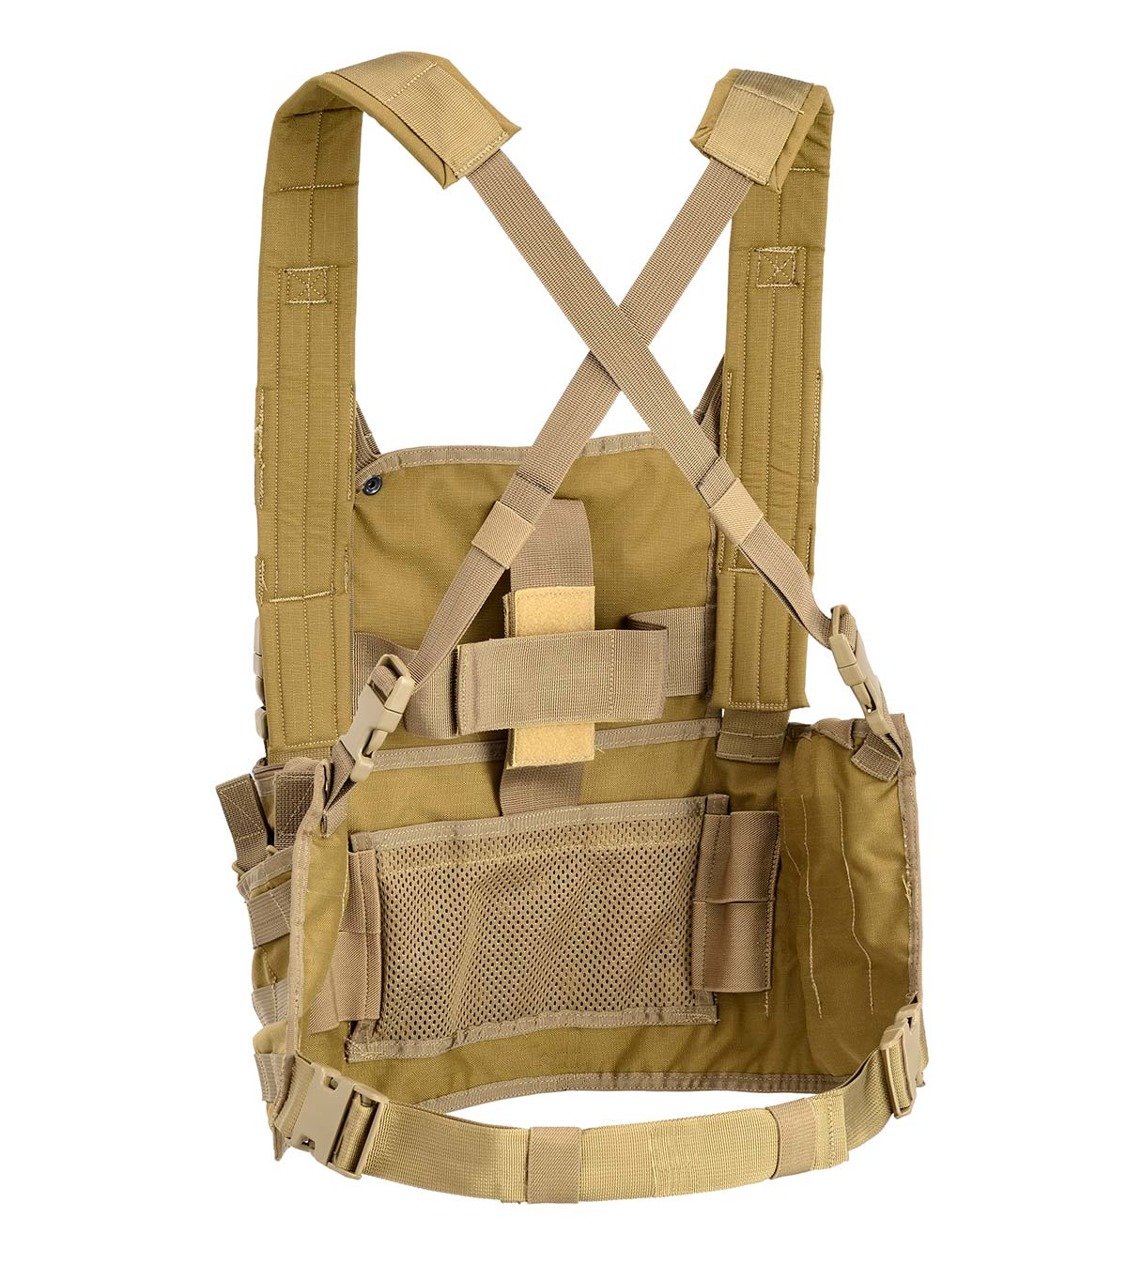 EVOLUTION RECON HARNESS ARMOUR, ARMOR VEST | Military Tactical ...